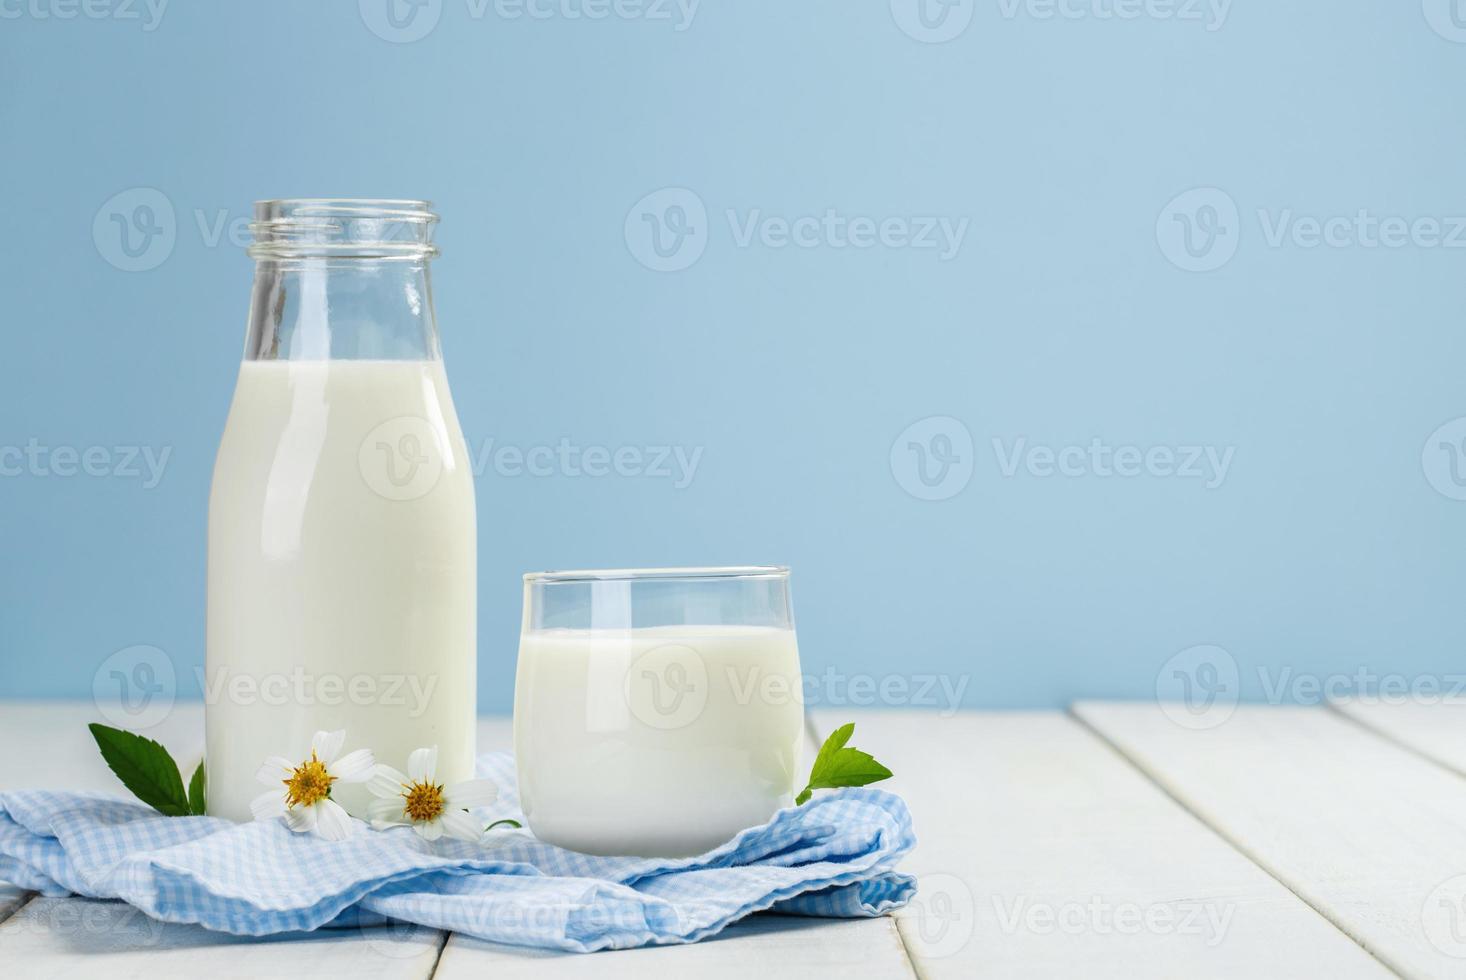 A bottle of milk and glass of milk on a white wooden table on a blue background, tasty, nutritious and healthy dairy products photo